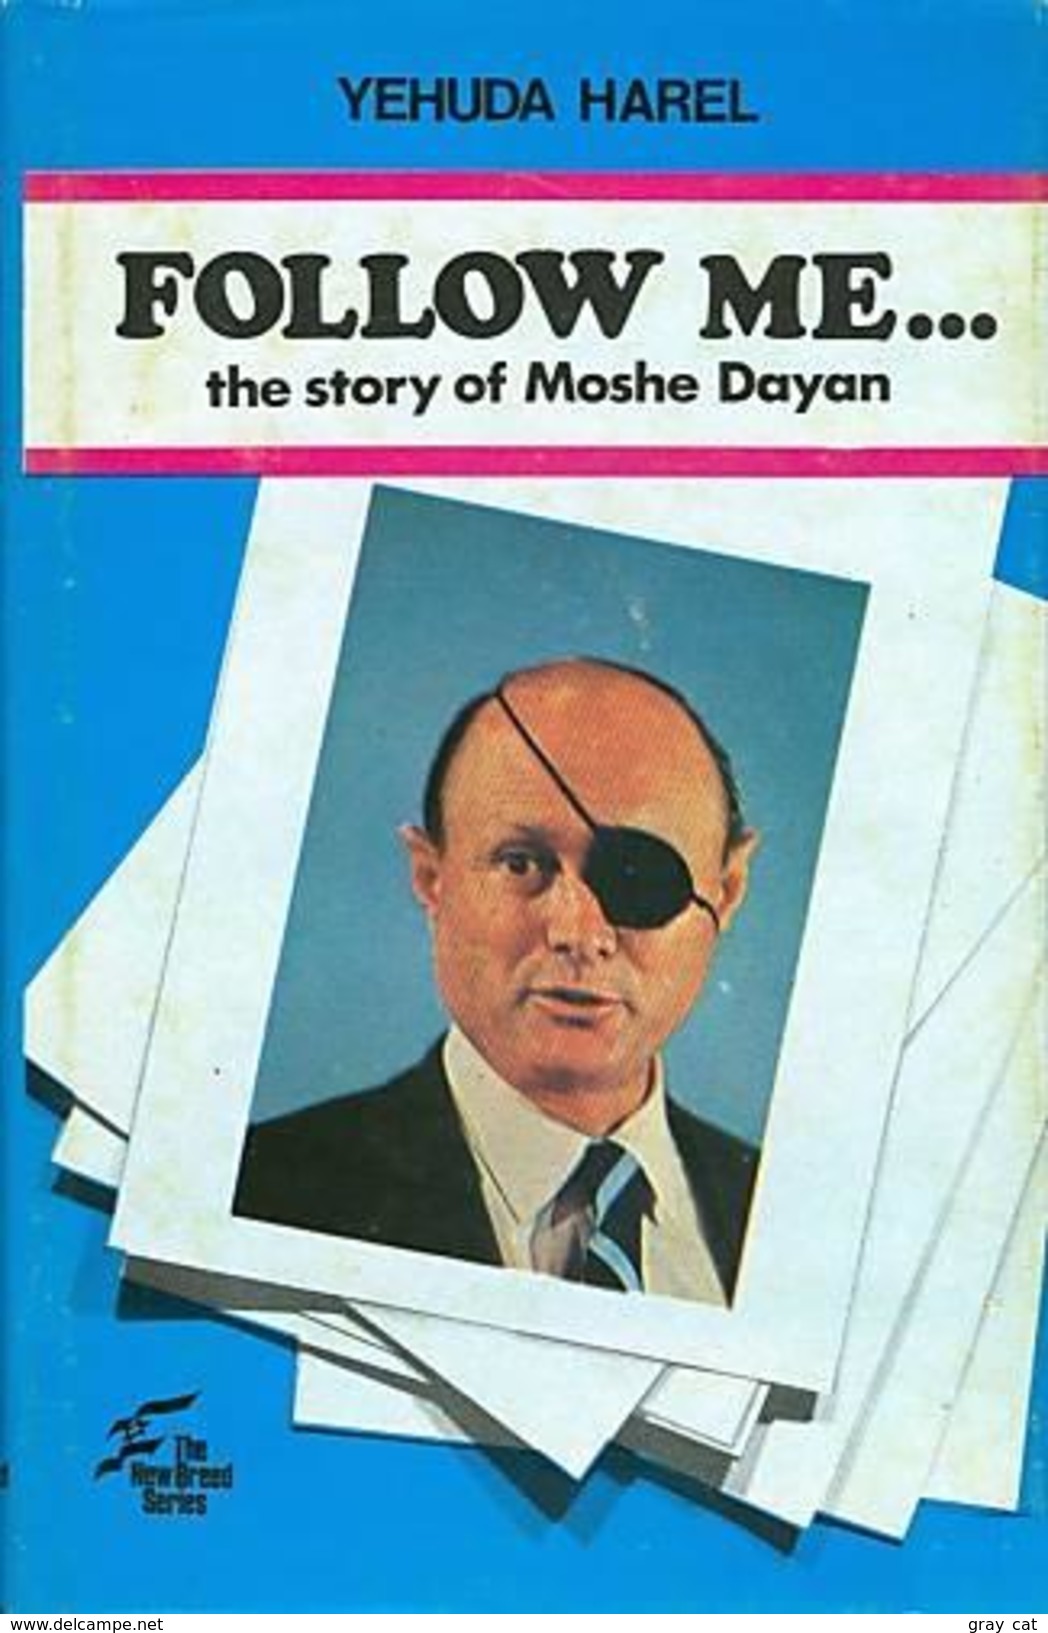 Follow Me: The Story Of Moshe Dayan By Yehuda Harel - Middle East